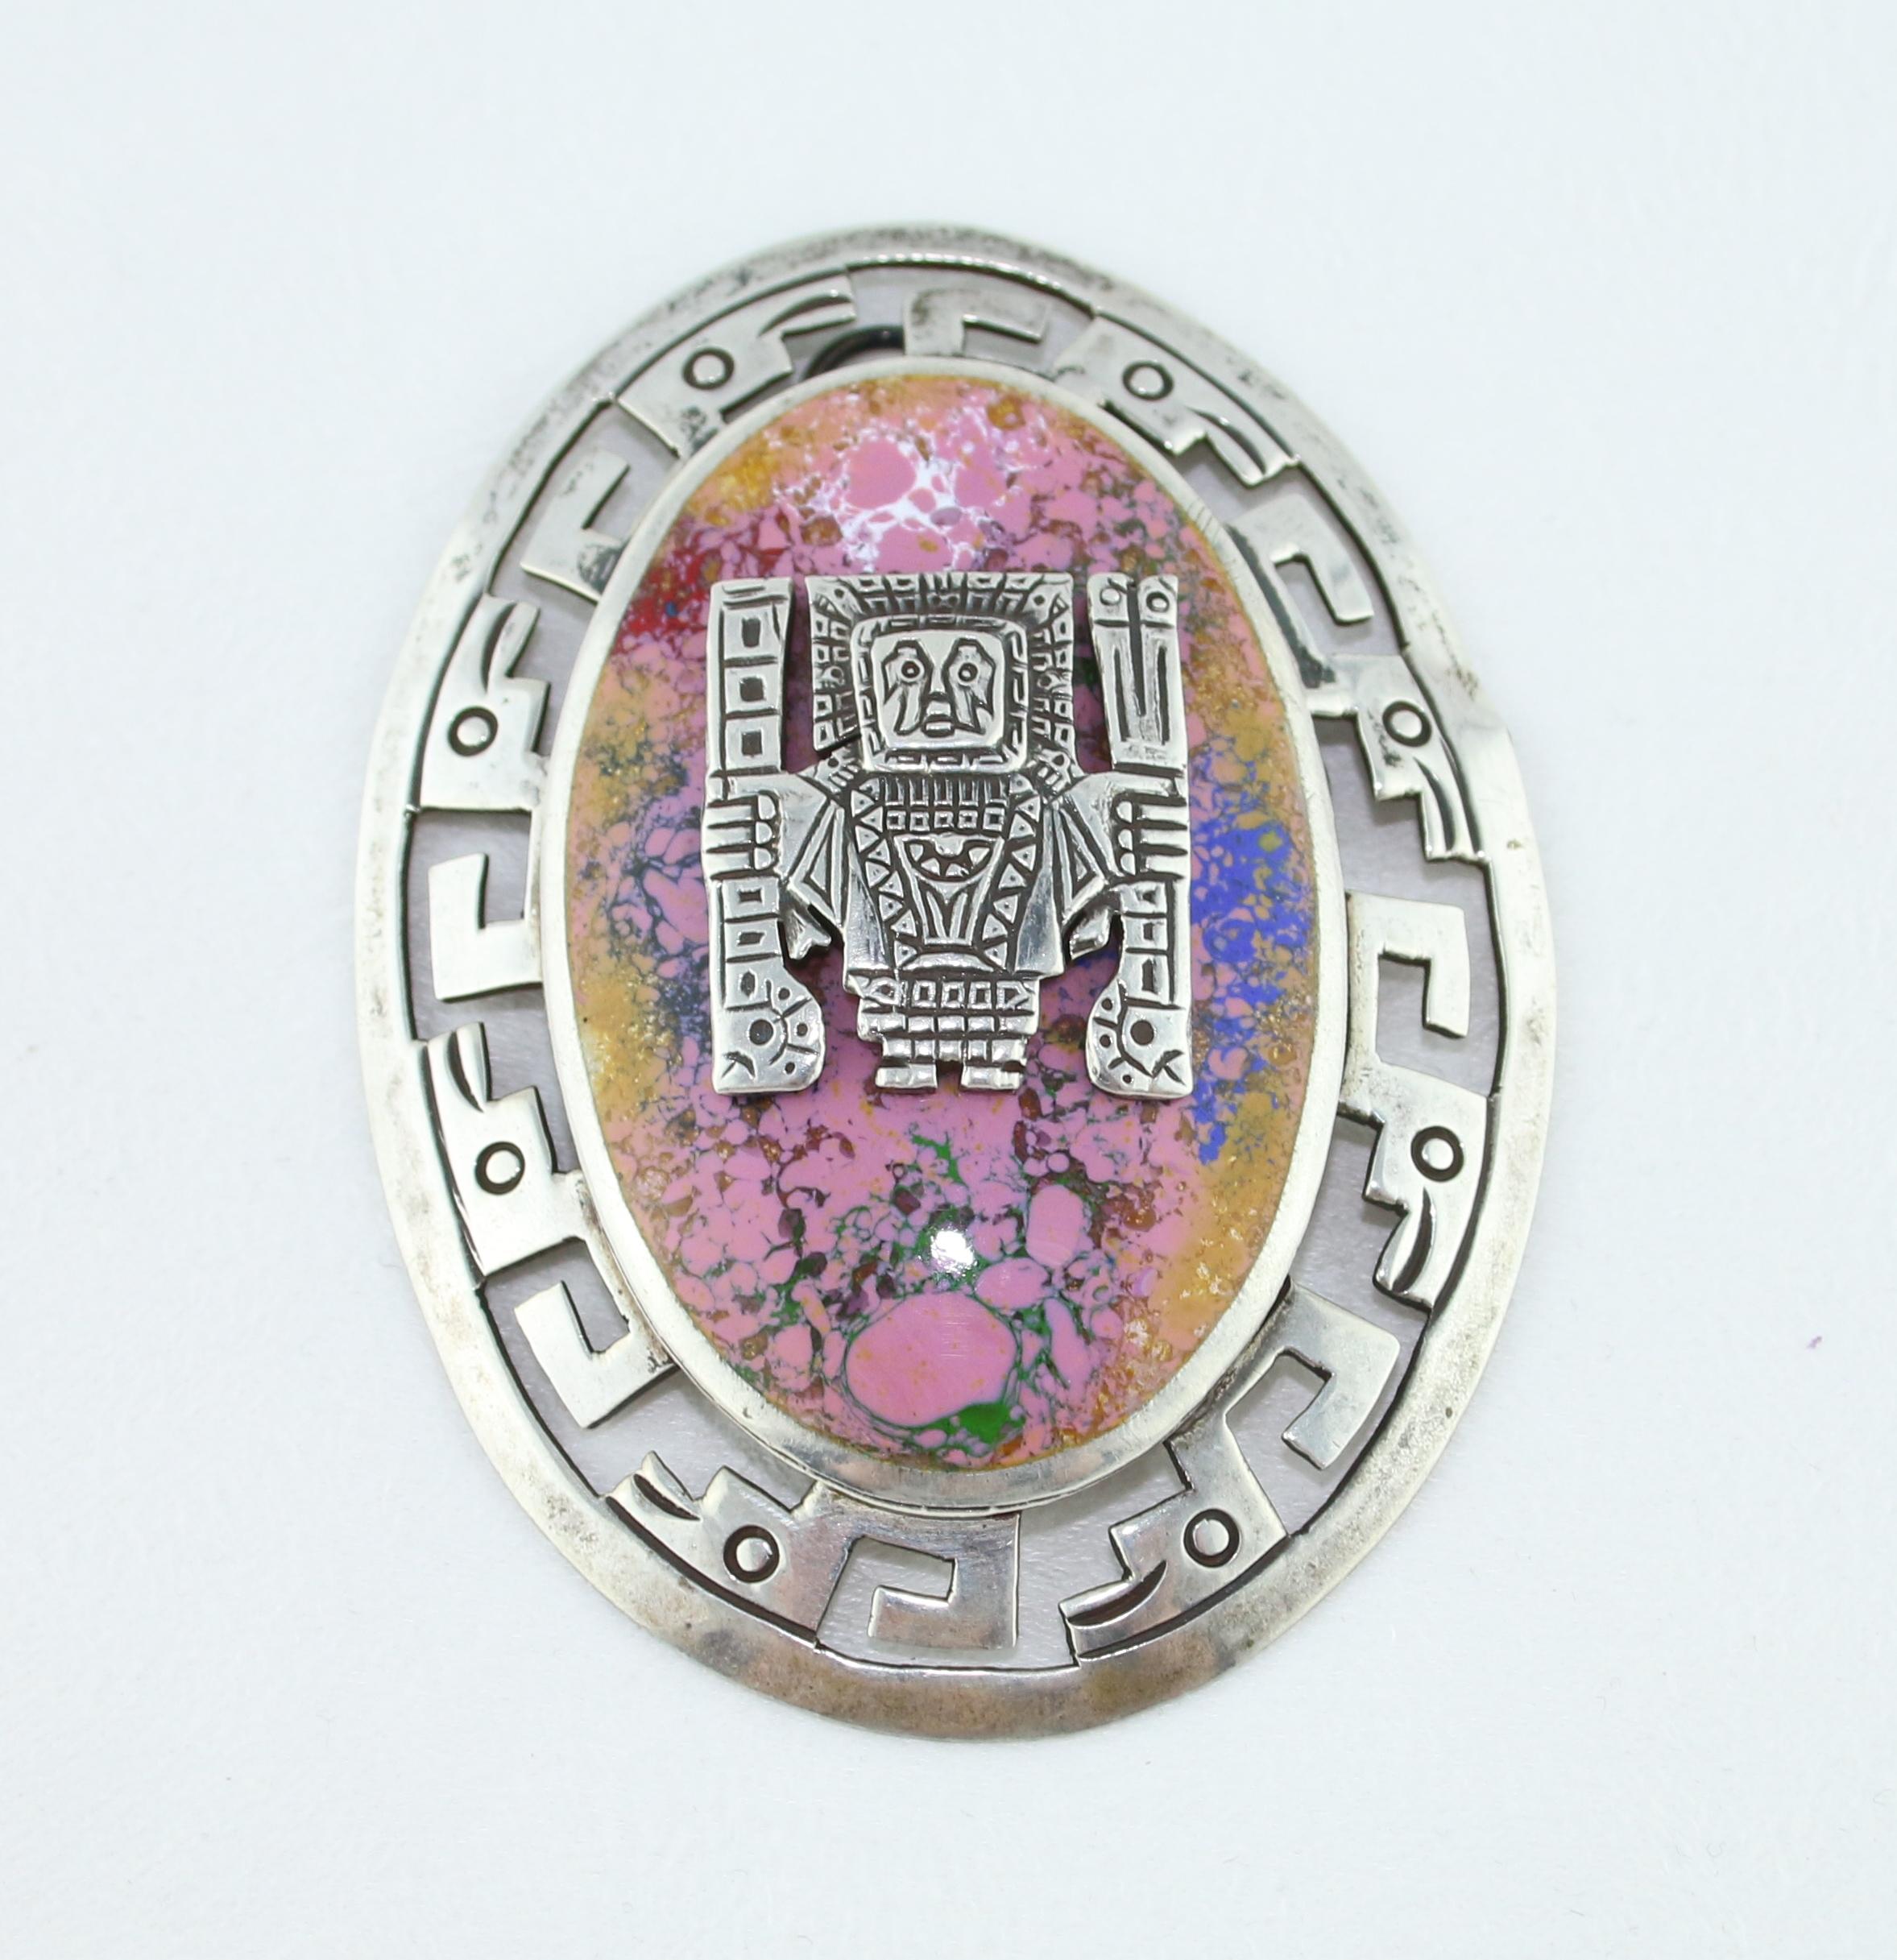 Stunning Large Vintage Pendant / Pin
The pin is signed CMC and its from Peru
It has the Inca Motif
The pin is sterling silver and Enamel
The Pin measures 3